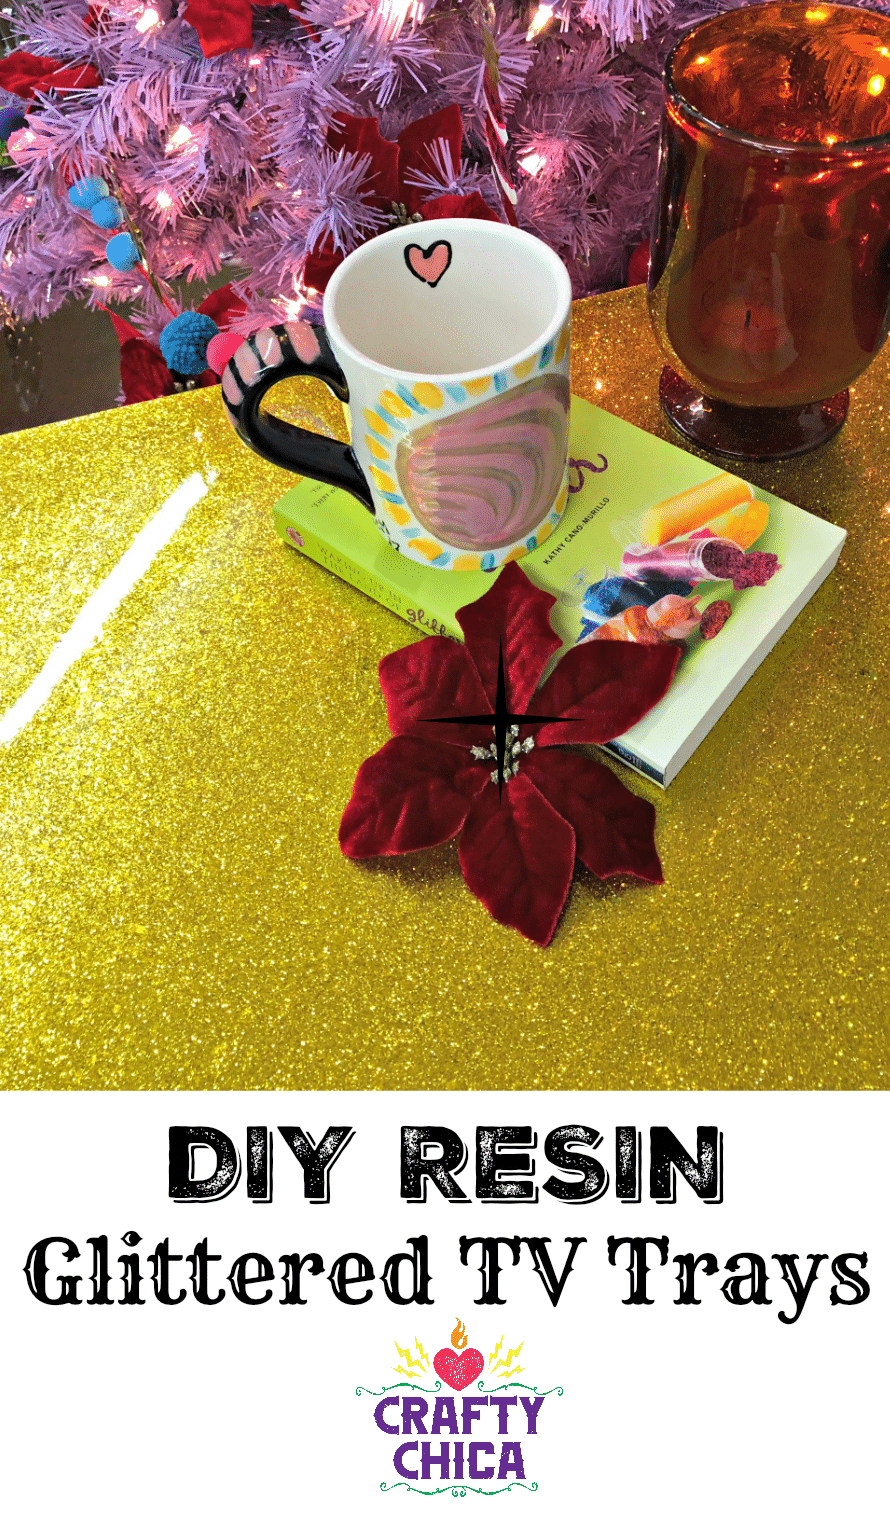 Resin and glittered TV trays